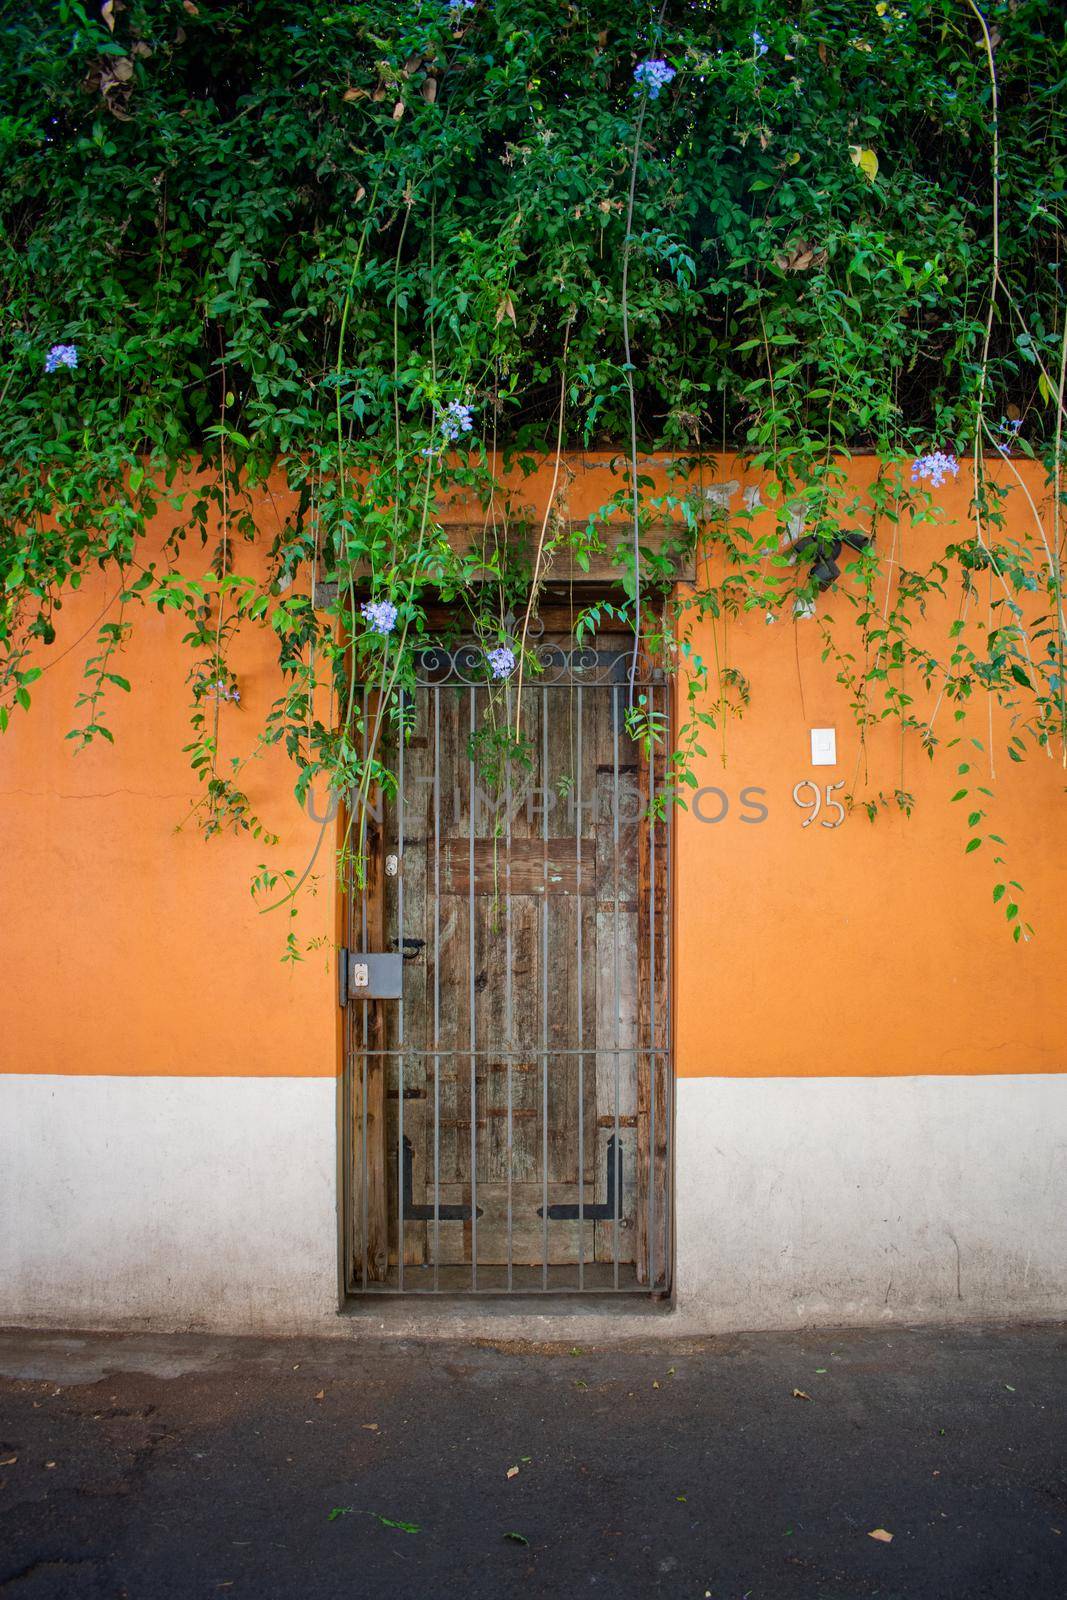 Climbing plants with blue flowers above orange and white wall with wooden door. Lattice door on house under green leaves in Mexico City. Colorful Mexican neighborhood